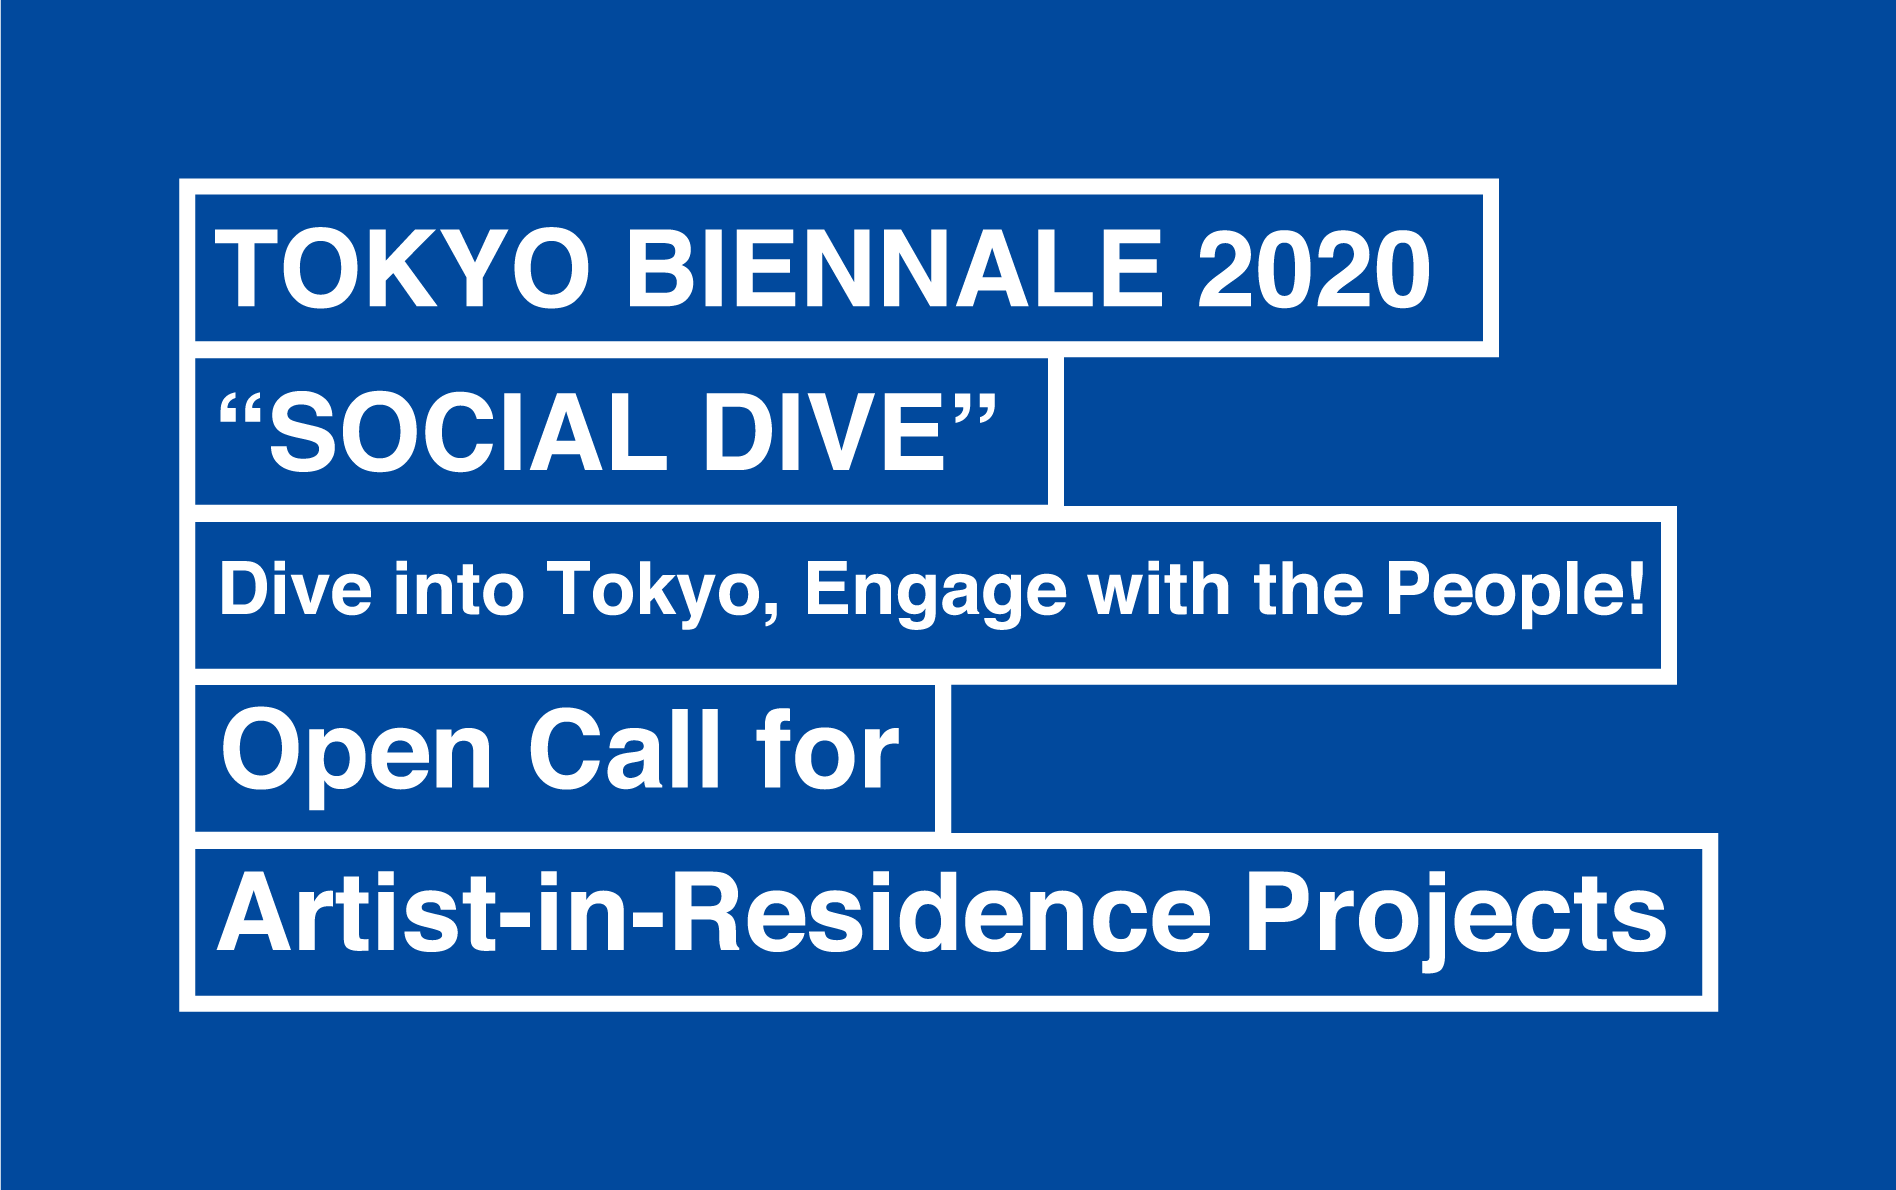 Calling for Overseas Artists to Dive into Tokyo! Apply to Create an Artist-in-Residence Project with Tokyo Biennale 2020!!